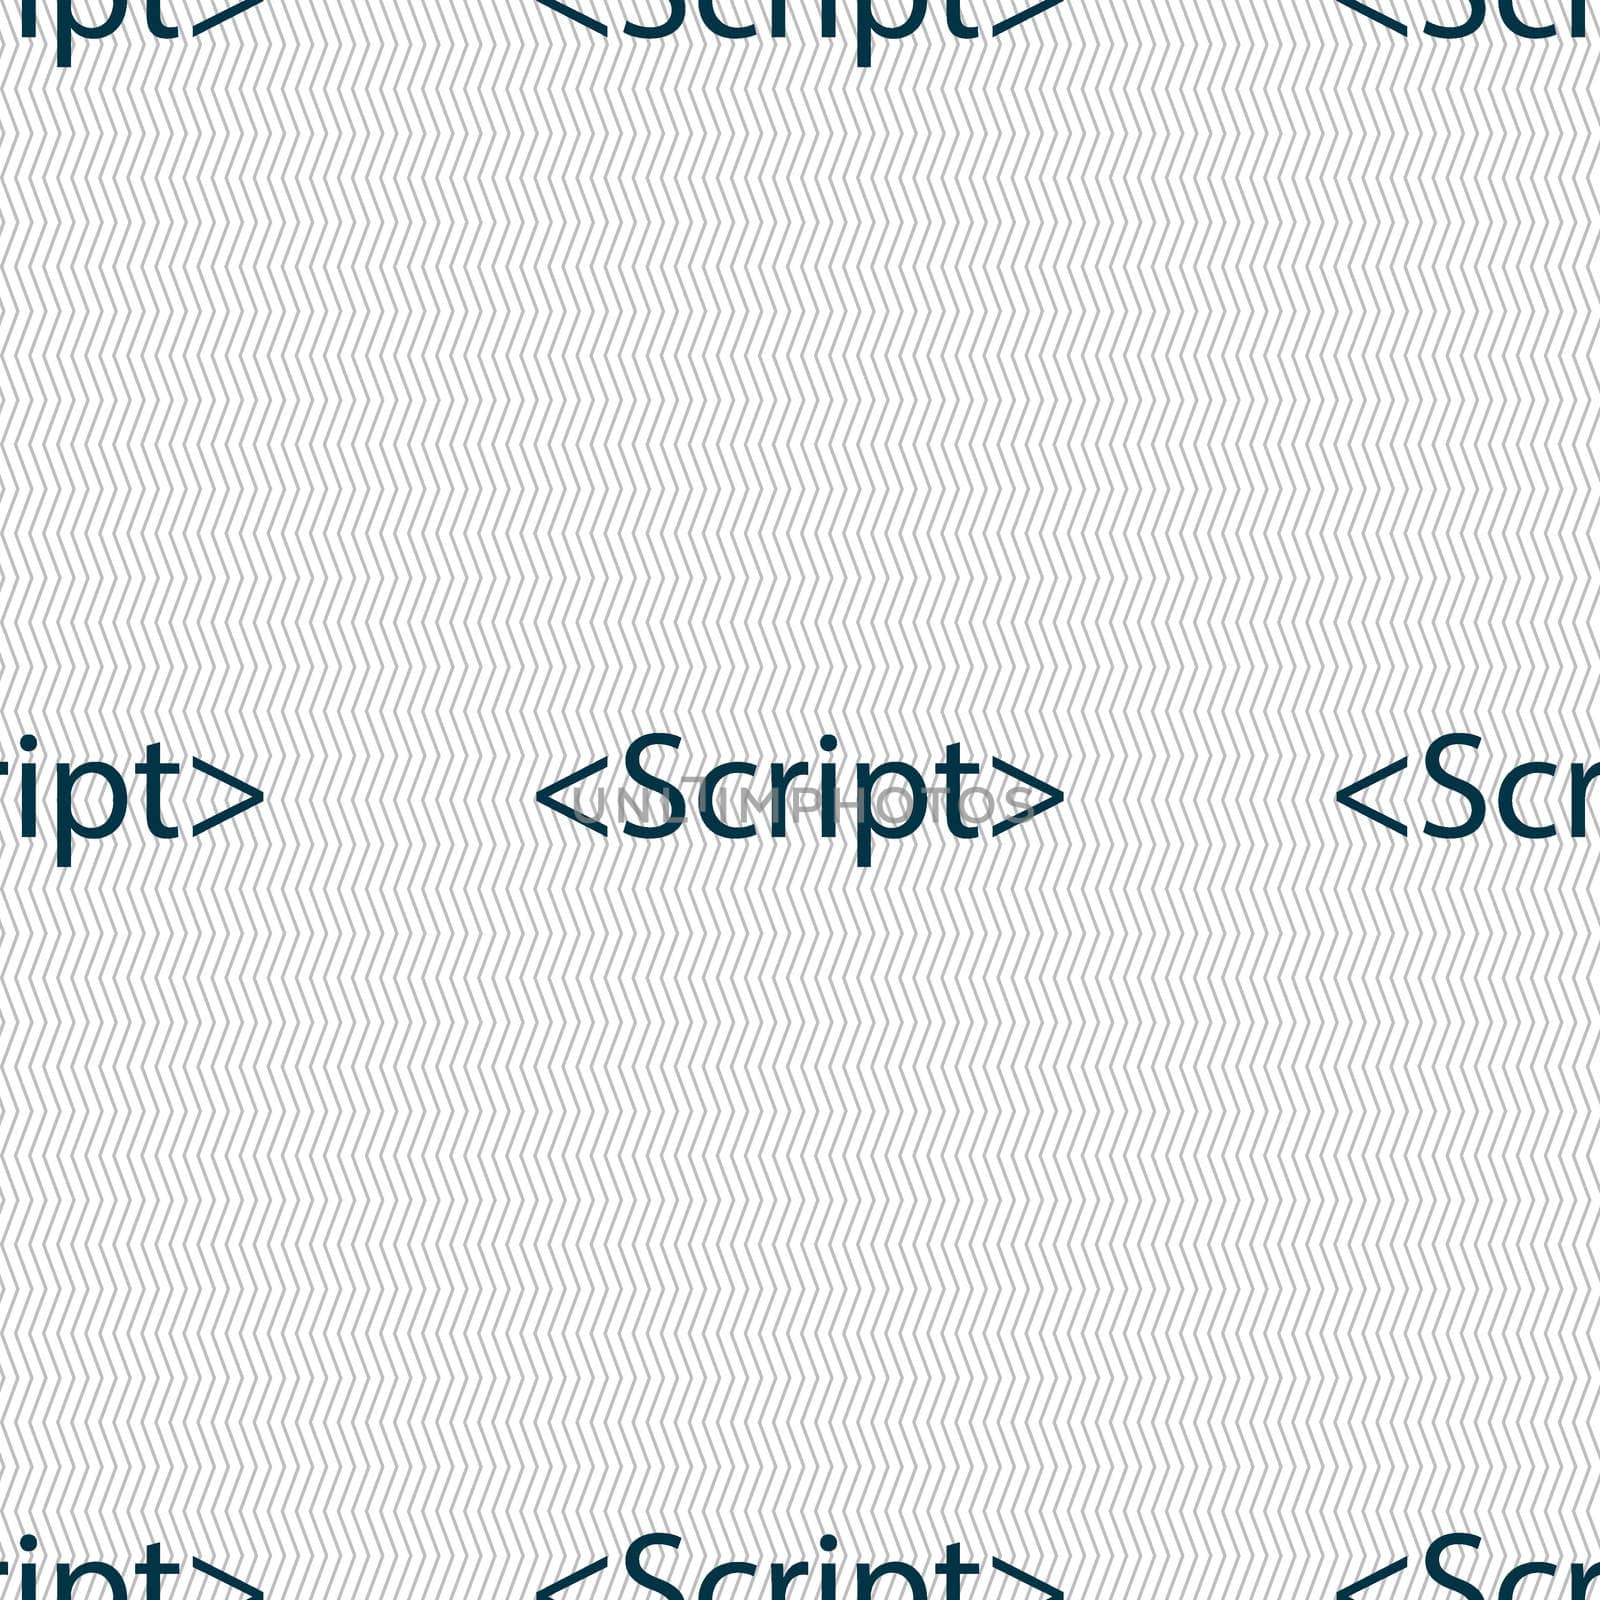 Script sign icon. Javascript code symbol. Seamless abstract background with geometric shapes. illustration